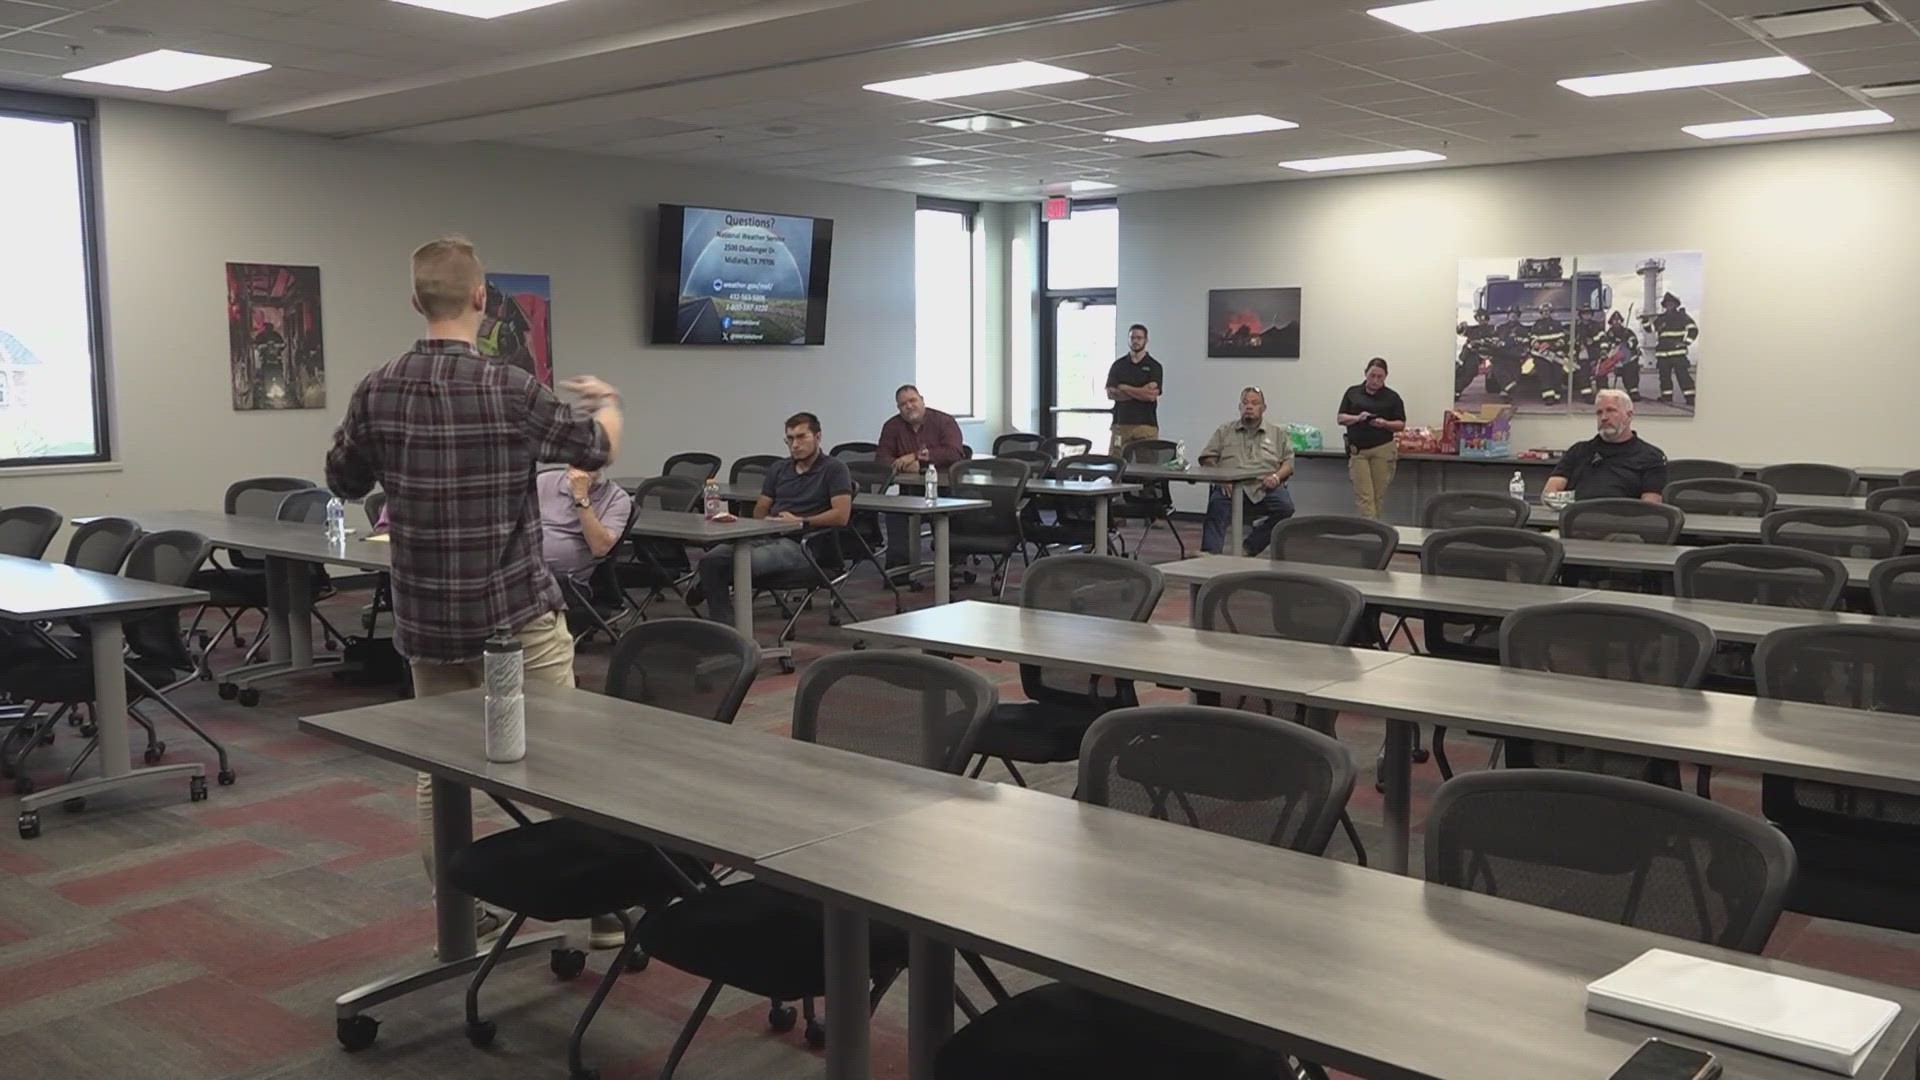 NewsWest 9 Meteorologist Aurora Murray was at the Skywarn Training, which took place at Odessa Fire and Rescue Station 6.